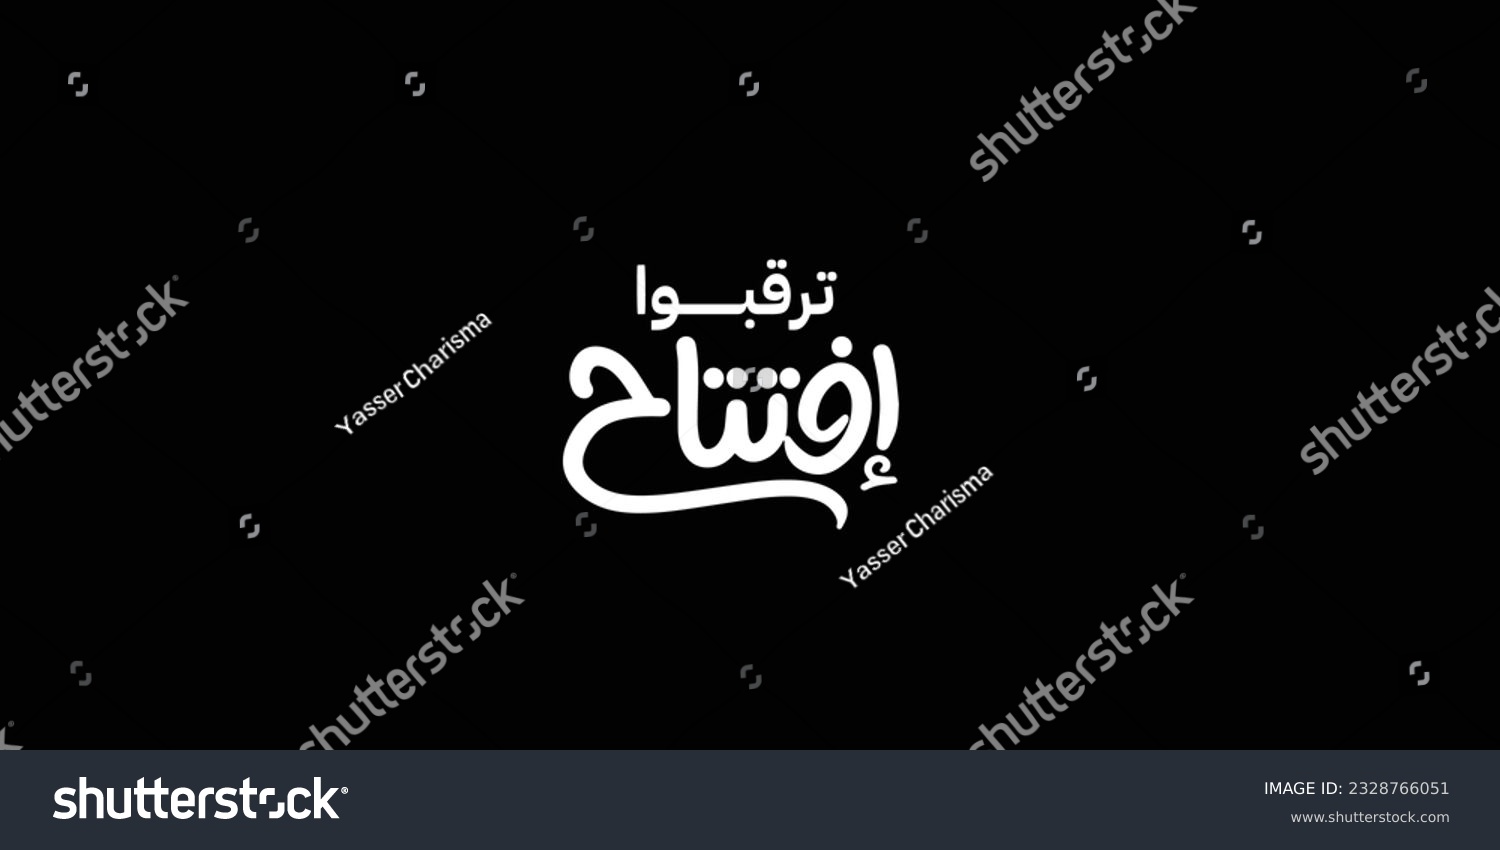 SVG of Arabic typography means in English ( opening soon  ) ,Vector illustration on solid background
 svg